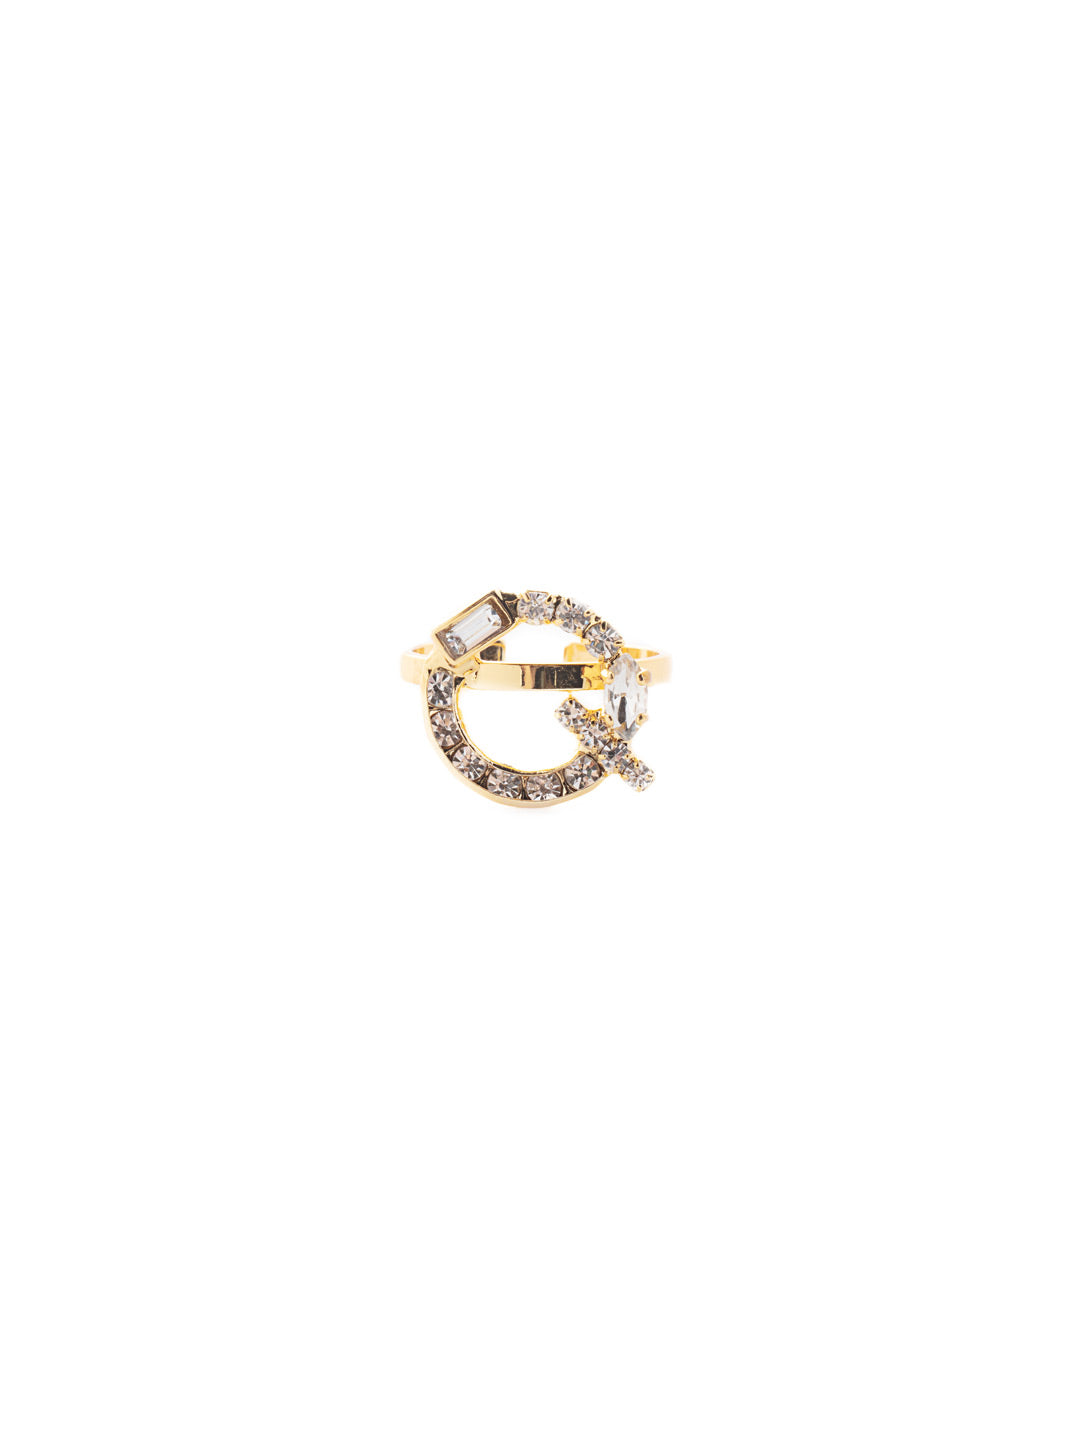 Product Image: Q Initial Statement Ring